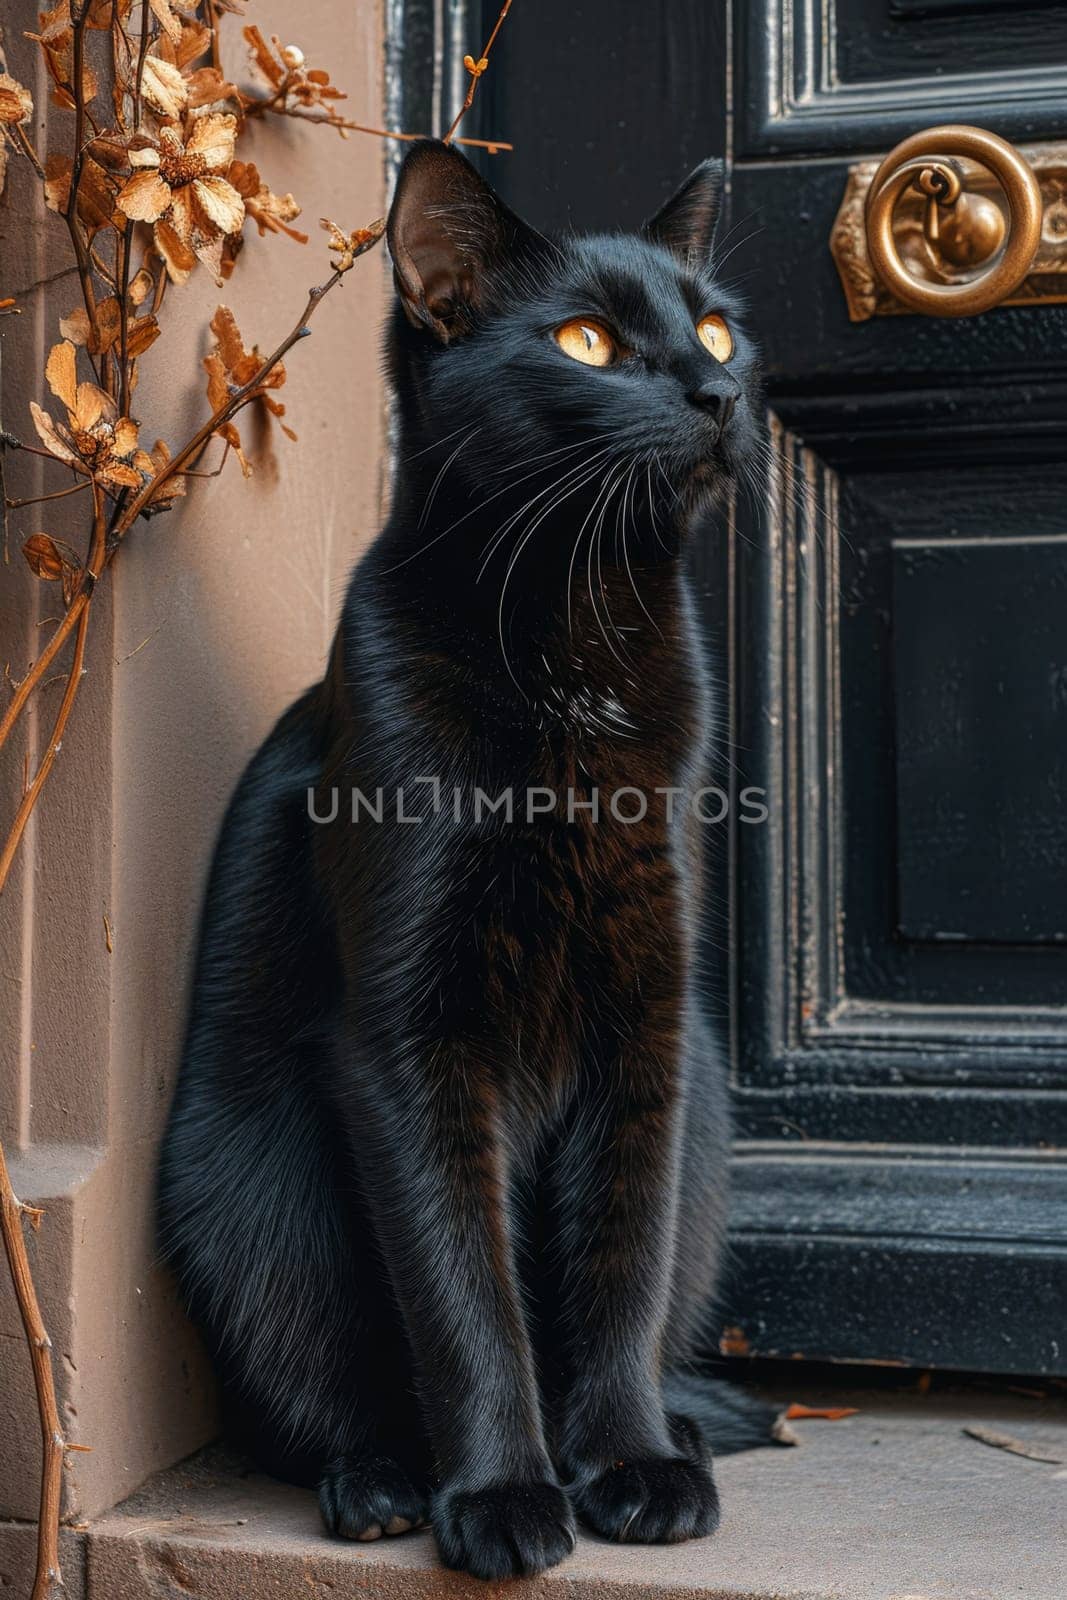 There was a cute black cat sitting near the door, guarding the entrance by Lobachad